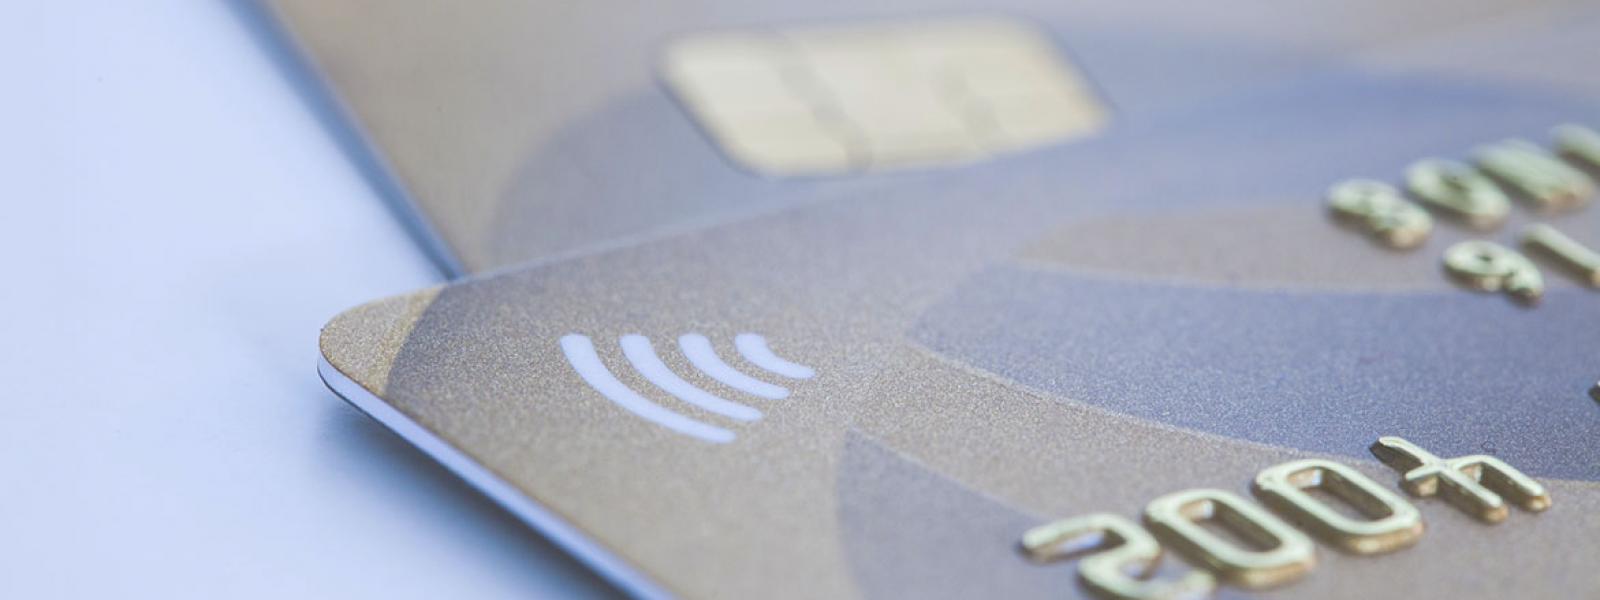 contactless banking cards